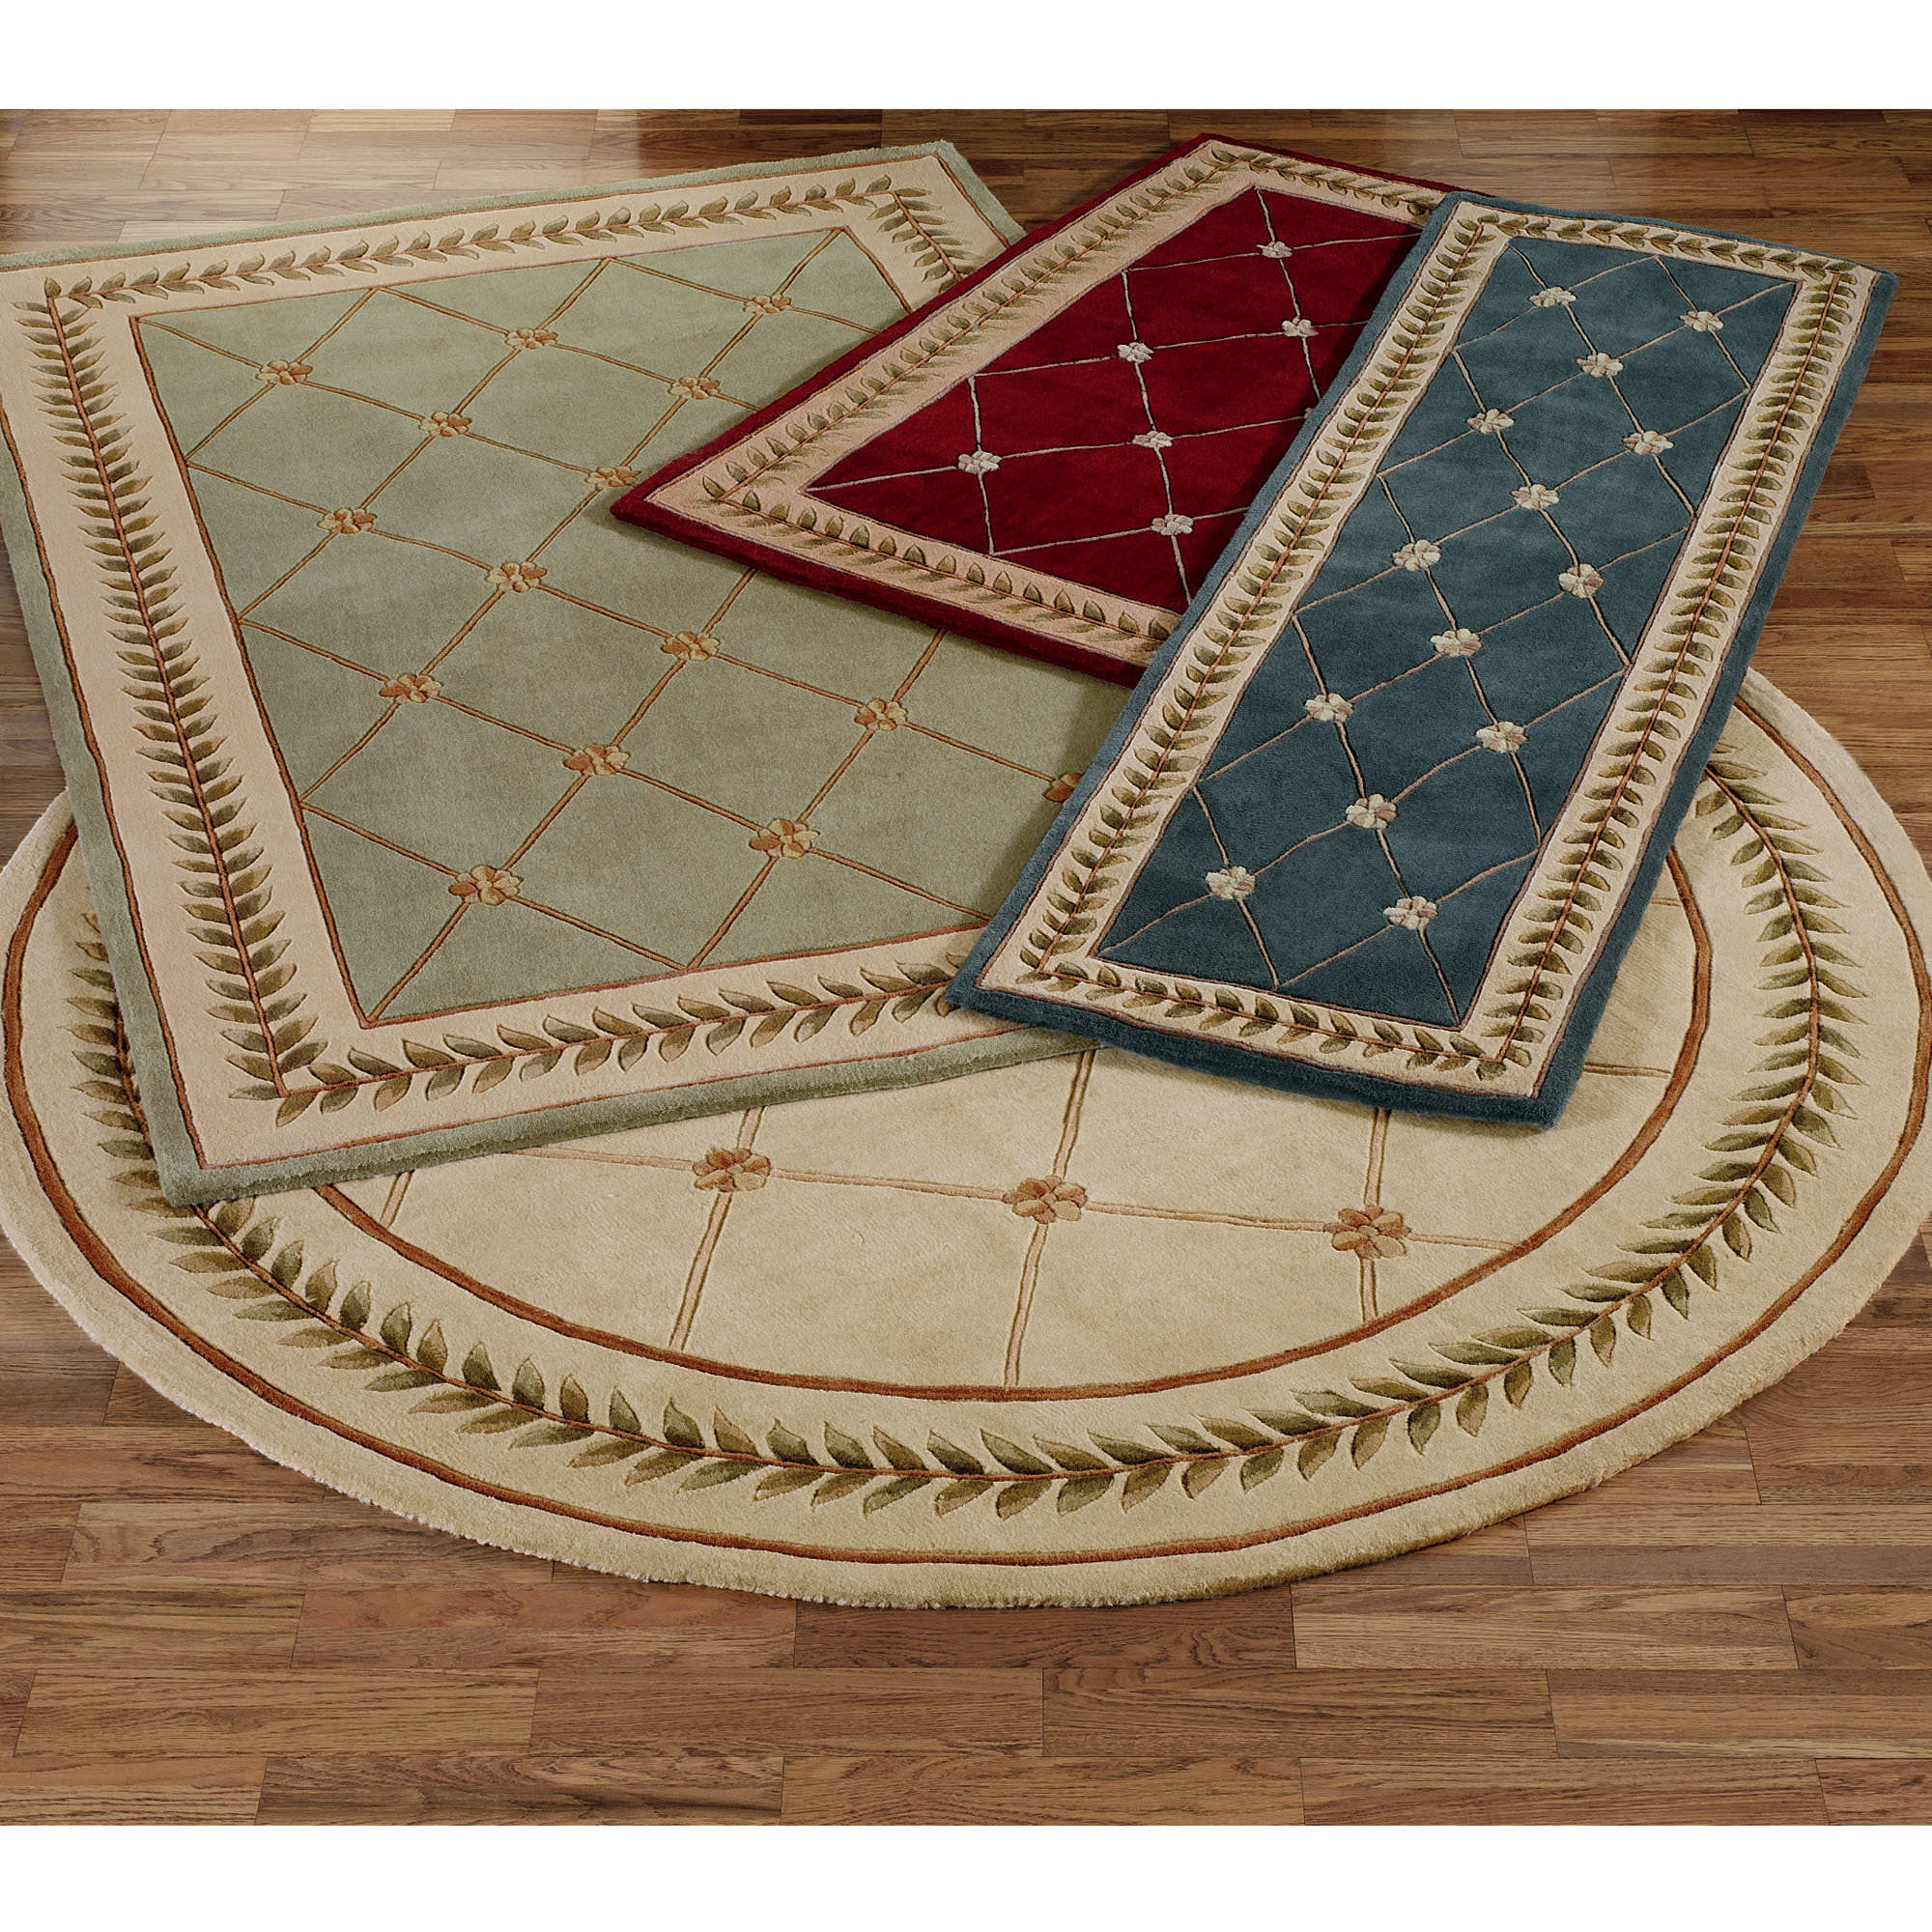 Image of: Round Entry Rugs